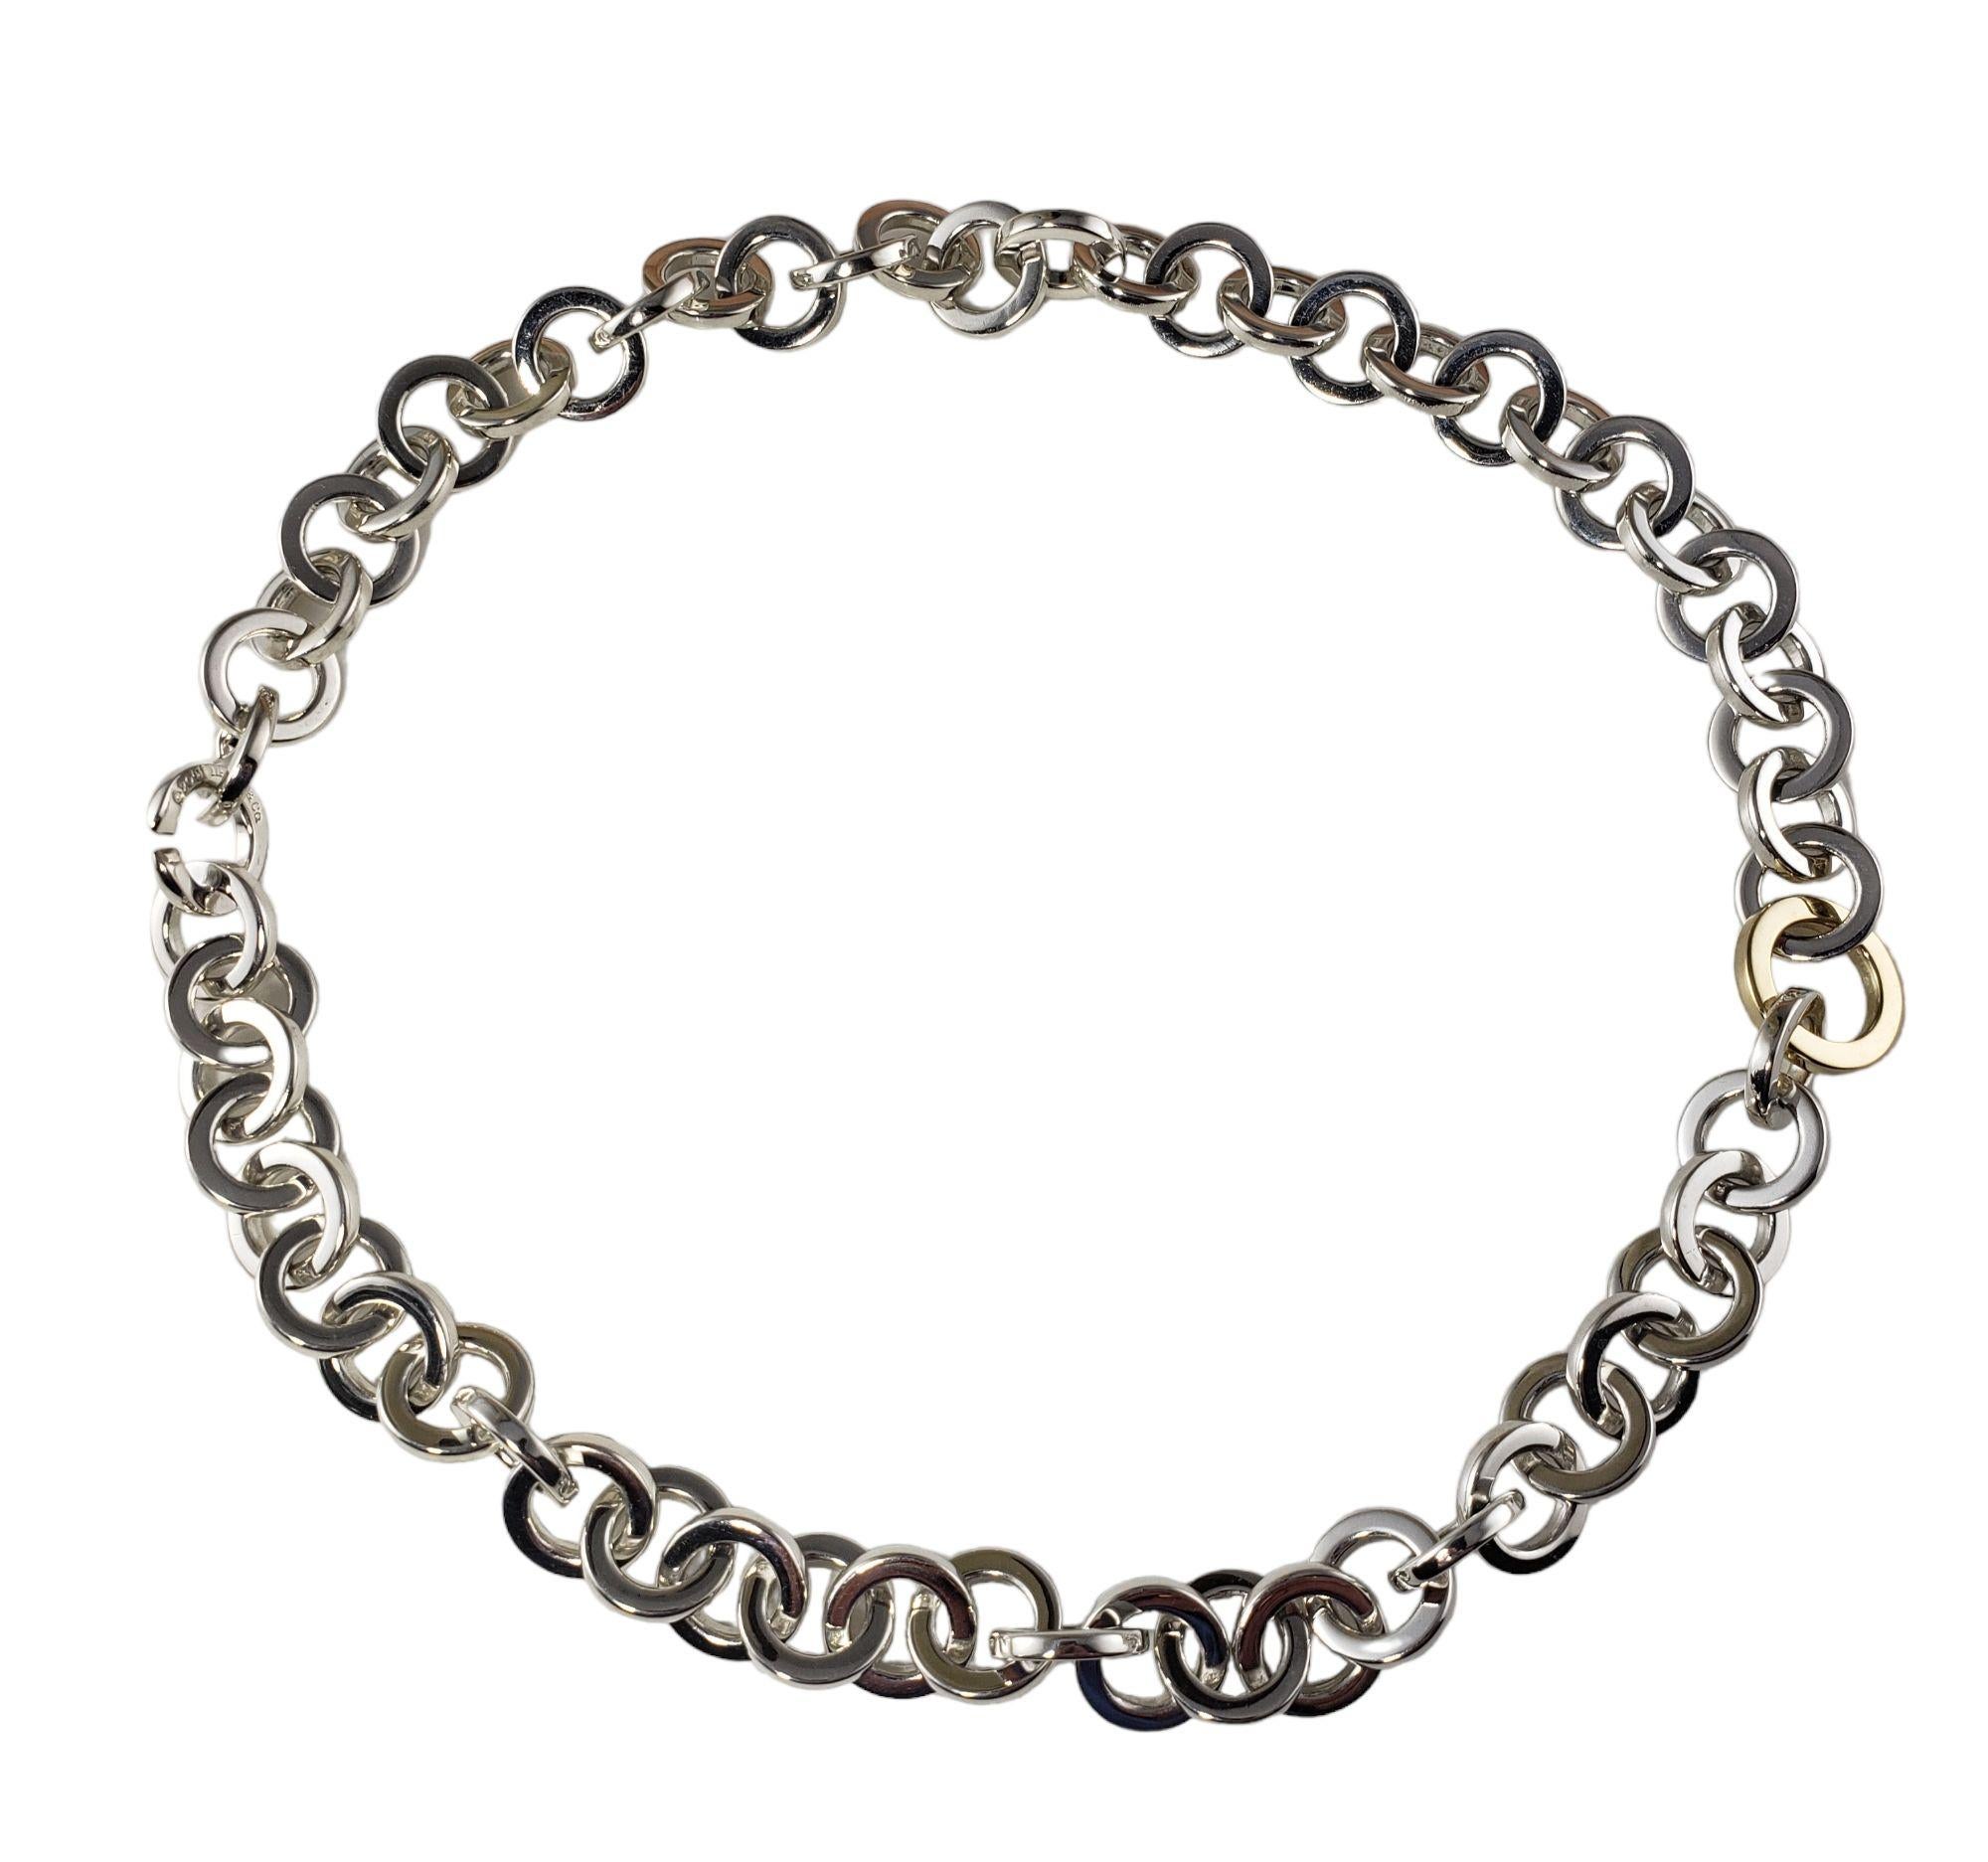 Tiffany & Co. Sterling Silver and 18 Karat Yellow Gold Open Circle Necklace-

This elegant necklace by Tiffany & Co. is crafted in beautifully detailed sterling silver and 18K yellow gold. Width: 15 mm.

* Matching bracelet: RL-00014283

Size: 16